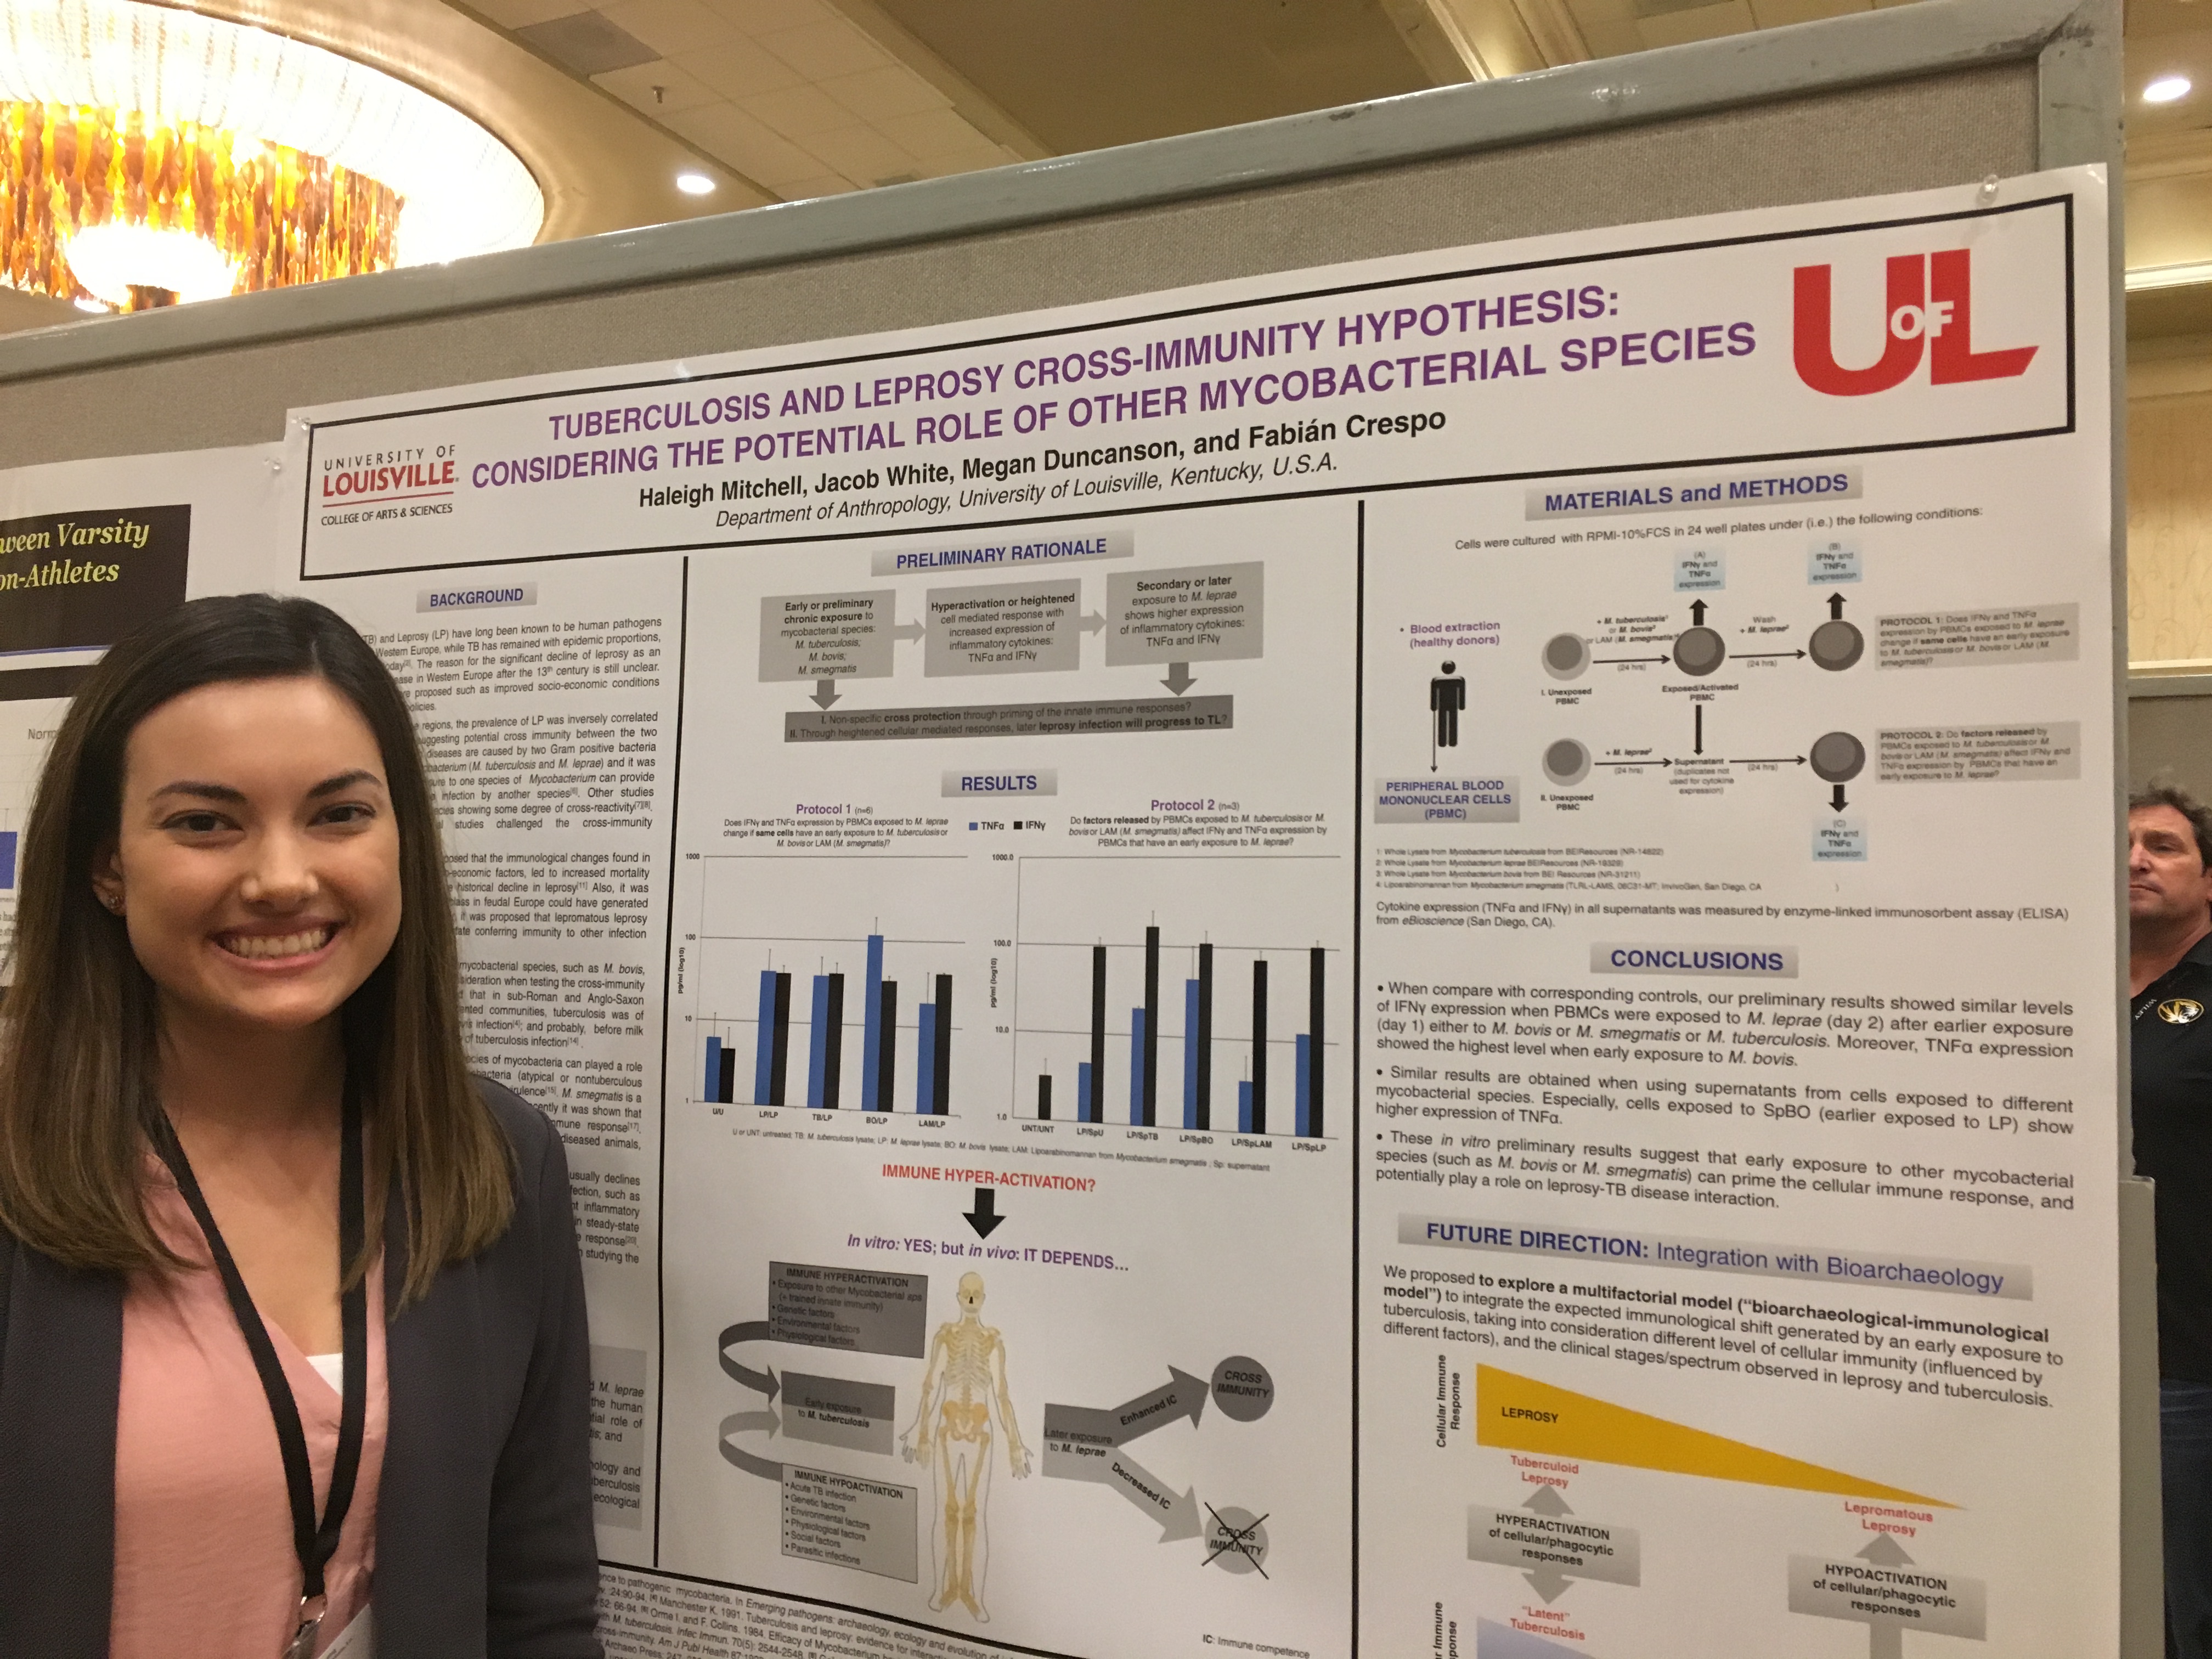 hALEIGH AT aapa 2017